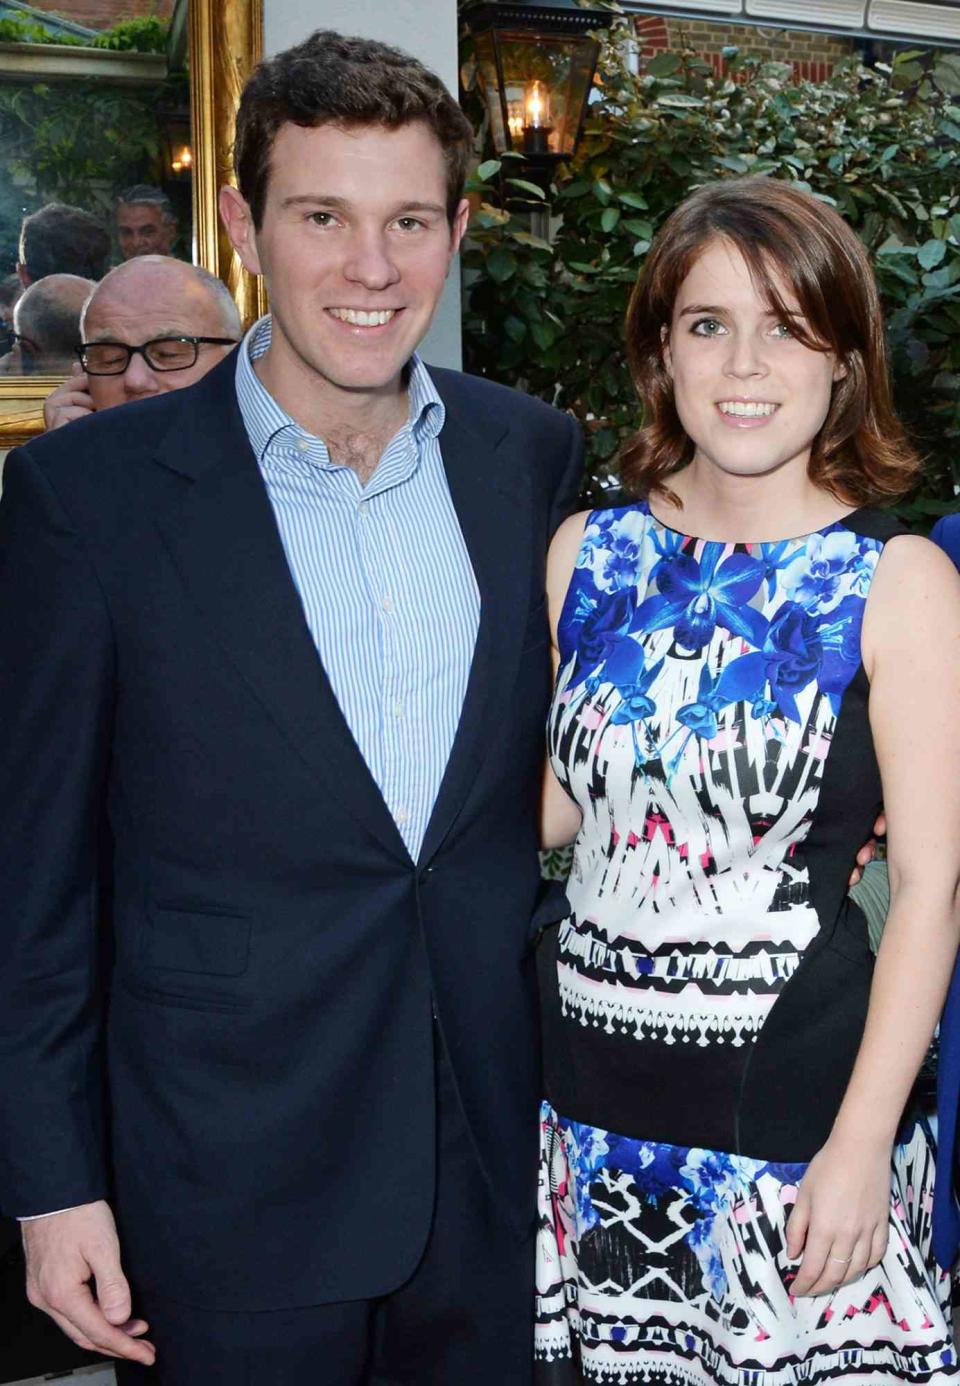 2013-2015: Princess Eugenie and Jack Brooksbank have a long-distance relationship